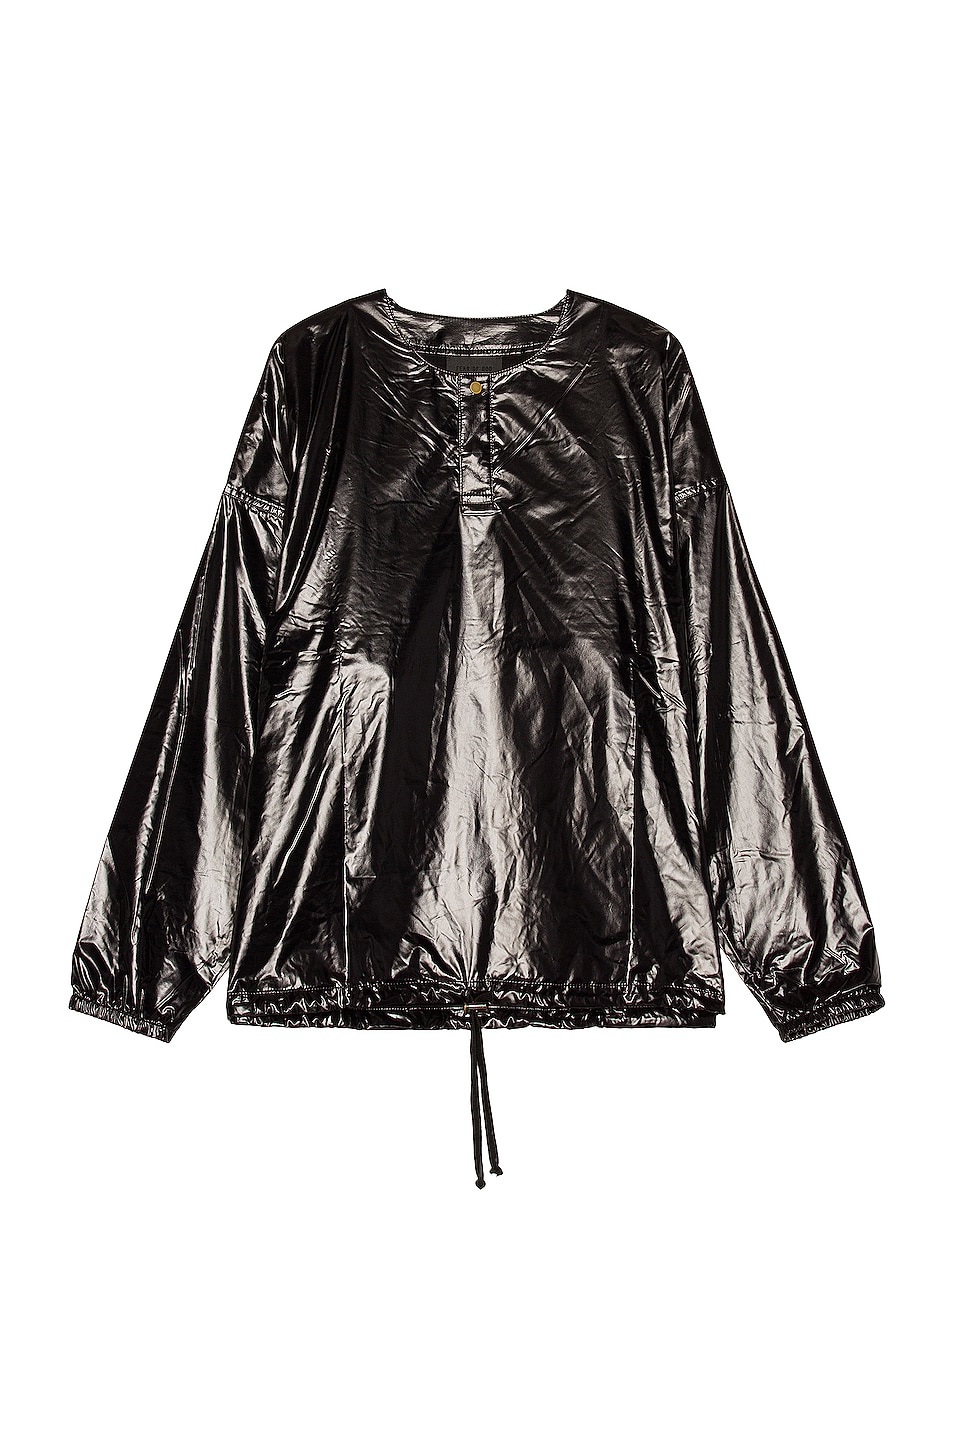 Image 1 of Fear of God Patent Batting Practice Jacket in Black